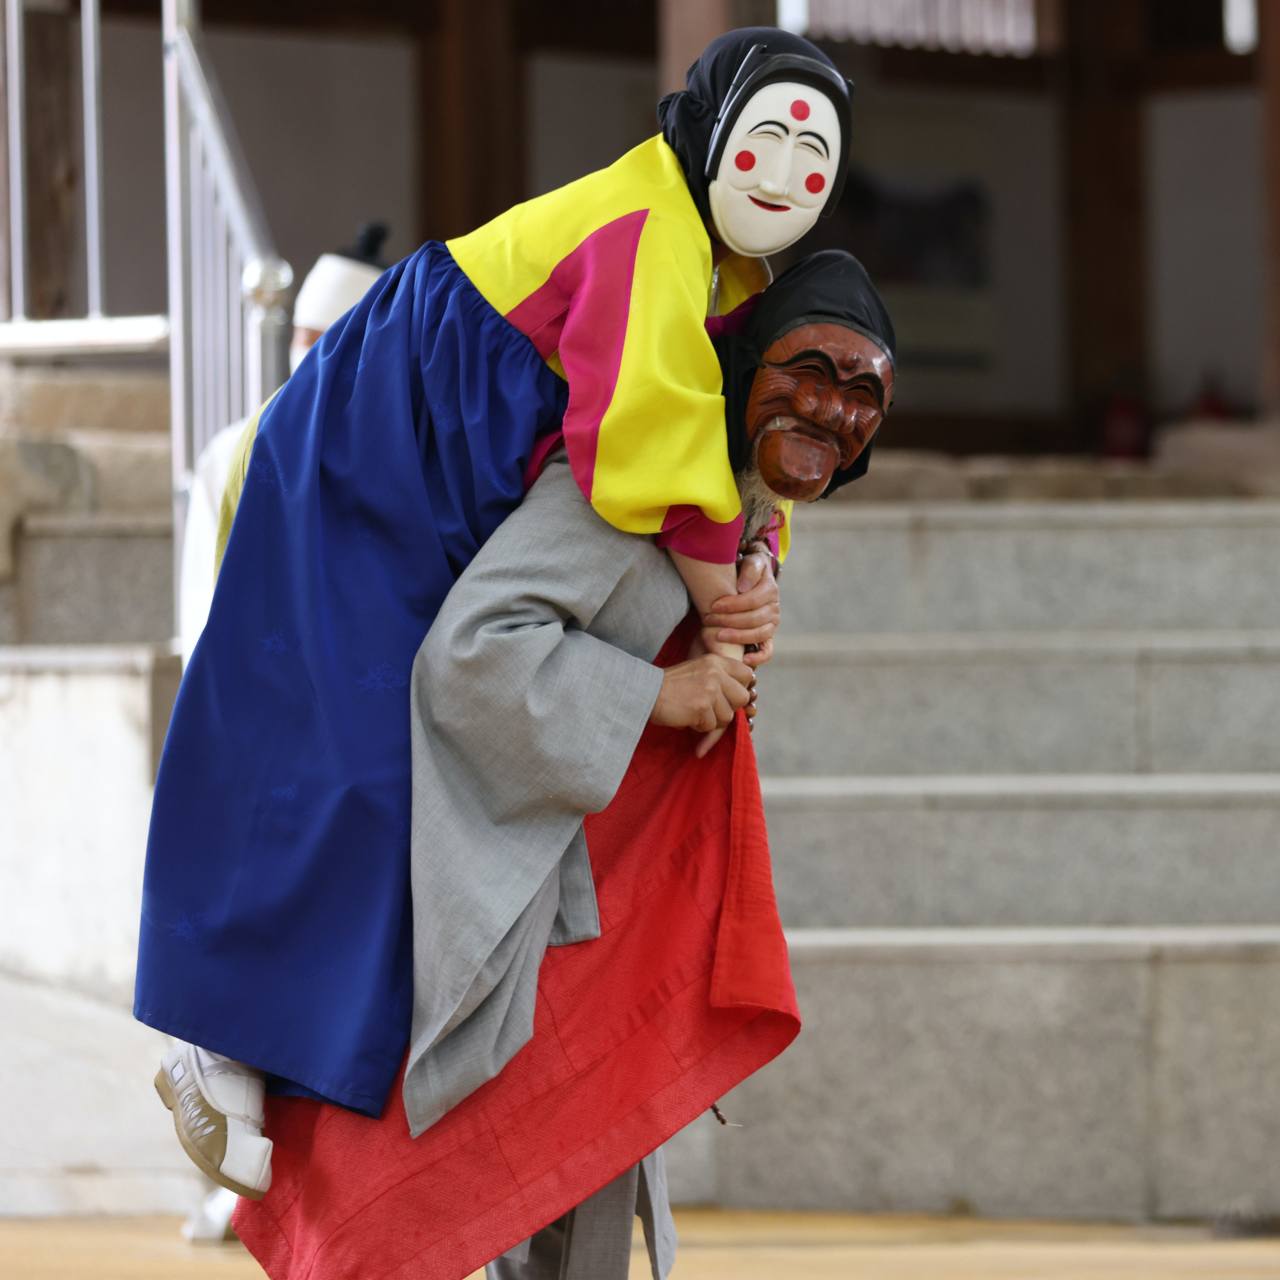 Monk and Bune masks are seen during a performance of the Hahoe Byeolsingut Talnori in Hahoe, Andong, North Gyeongsang Province. Photo © Hyungwon Kang